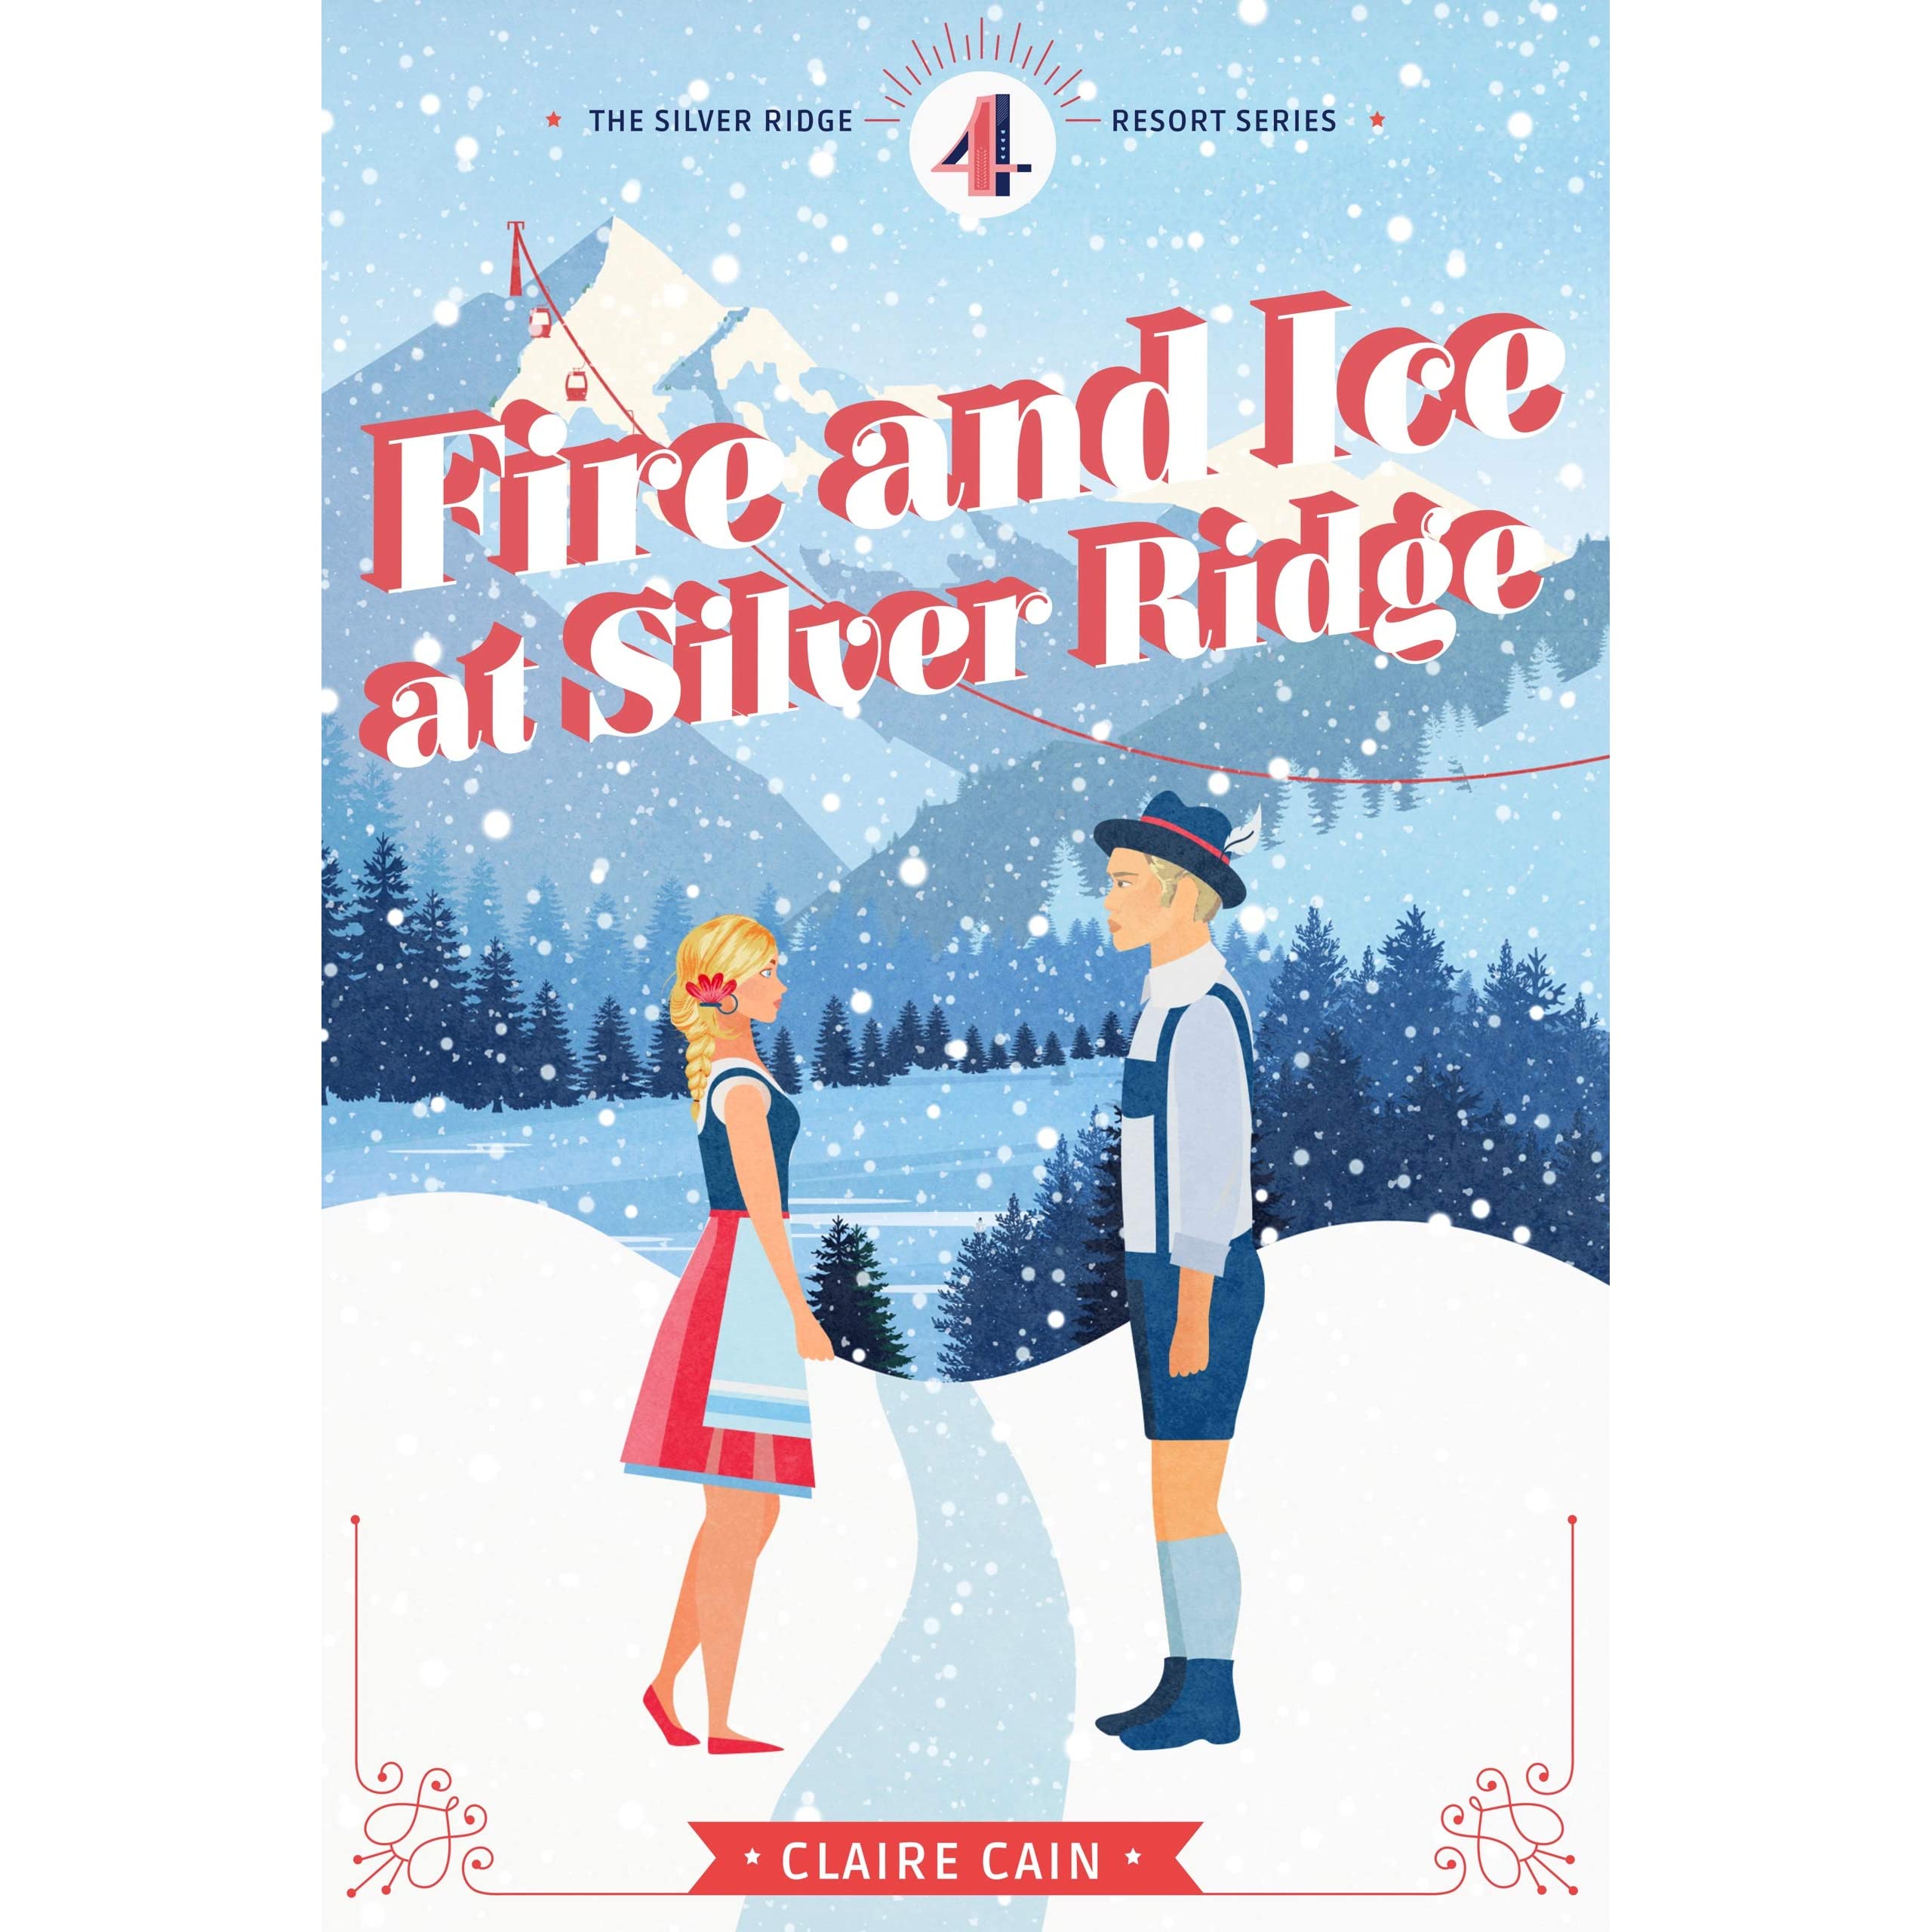 Fire and ice at silver ridge by Claire Cain